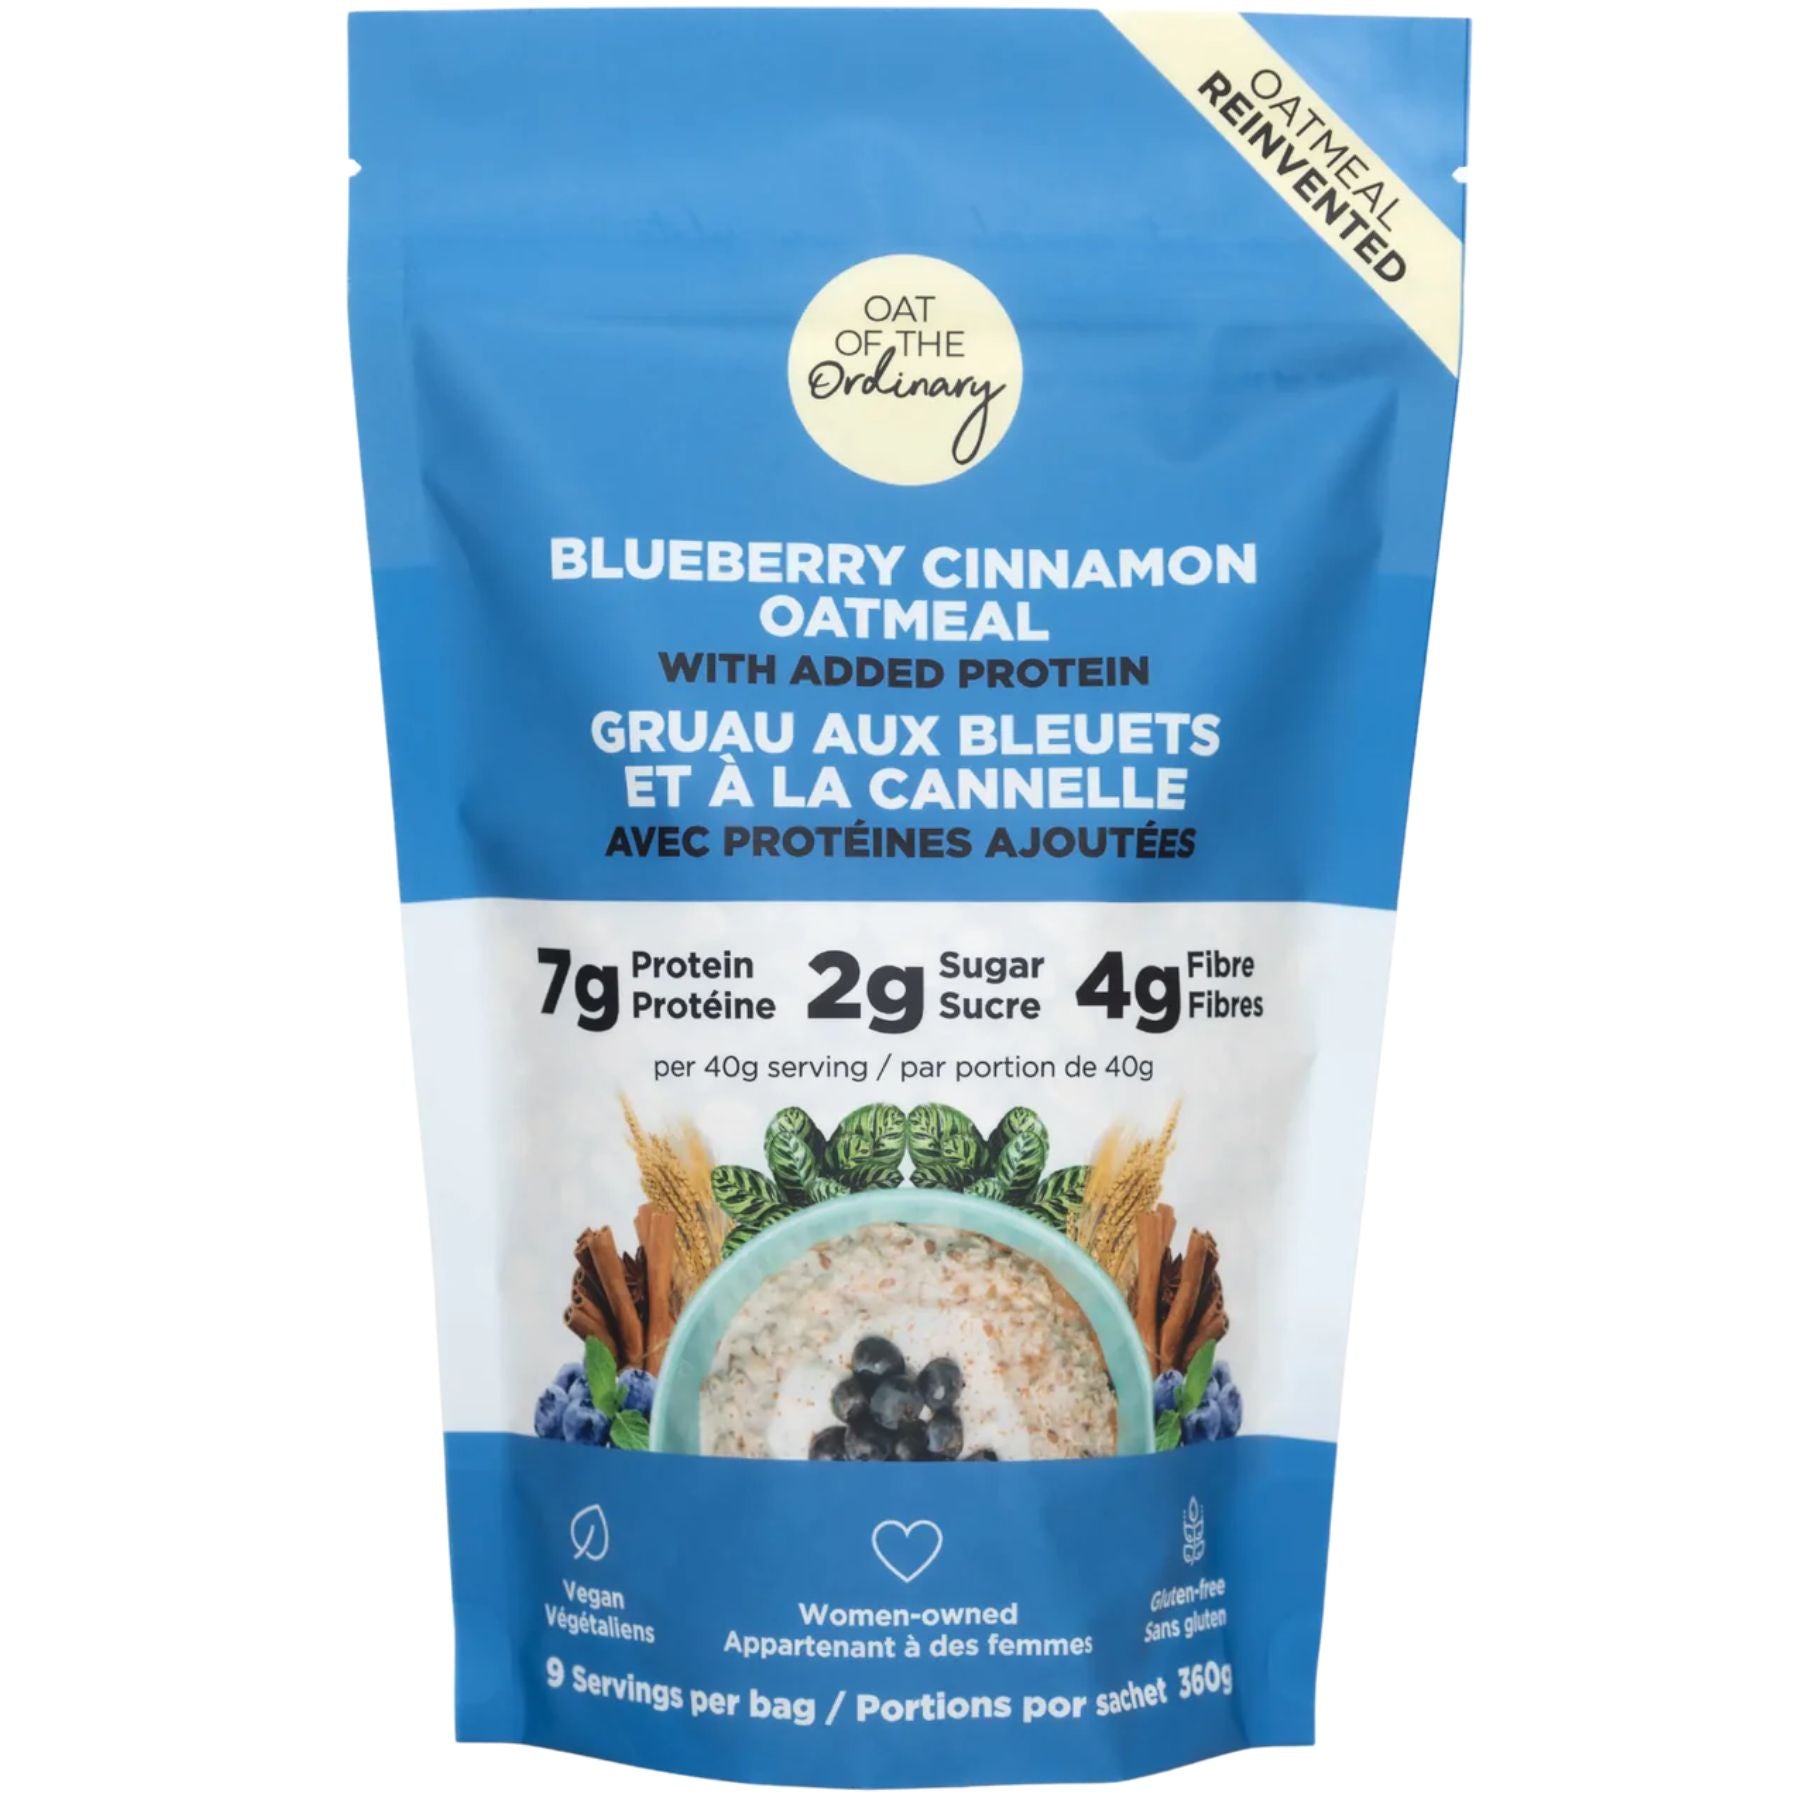 Oat of the Ordinary Blueberry Cinnamon Protein Oatmeal 360g